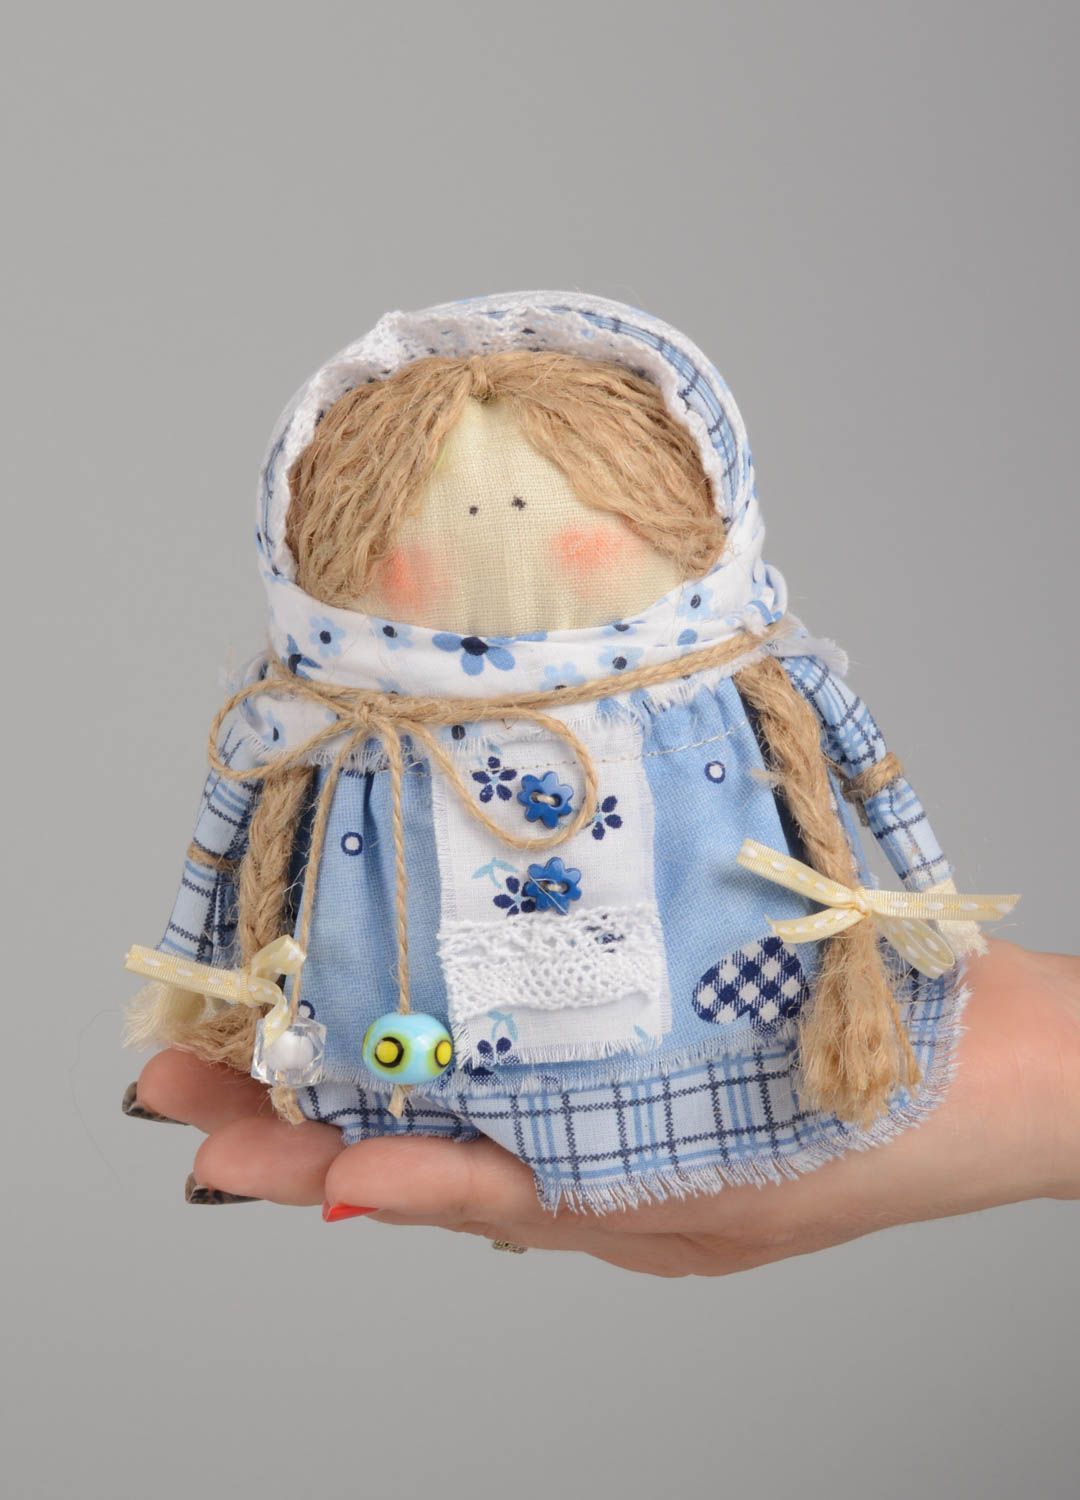 Handmade decorative interior charm doll filled with grains family talisman photo 5